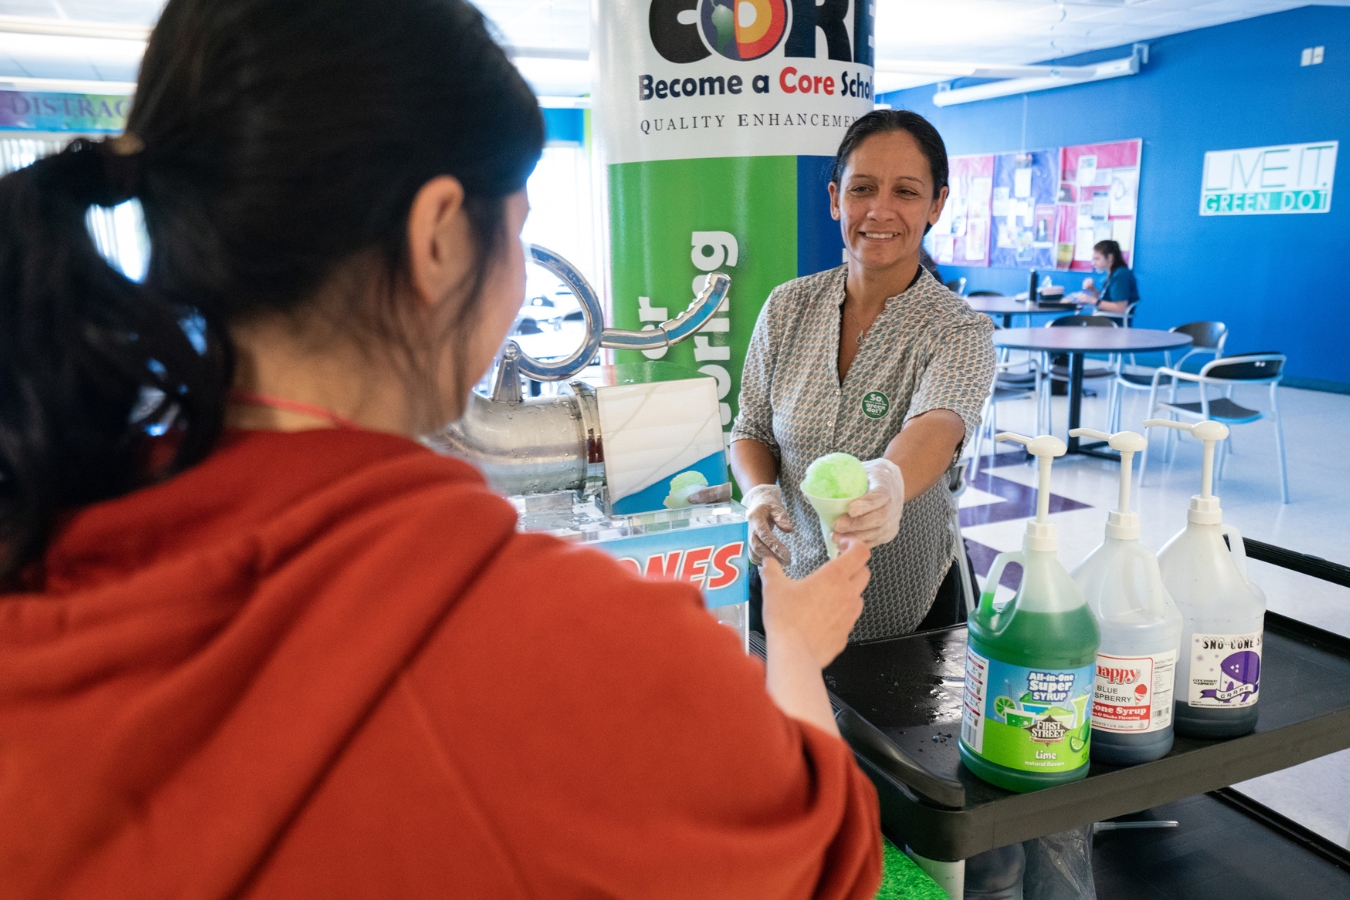 A female student grabbing a snow cone at a Green Dot campus event